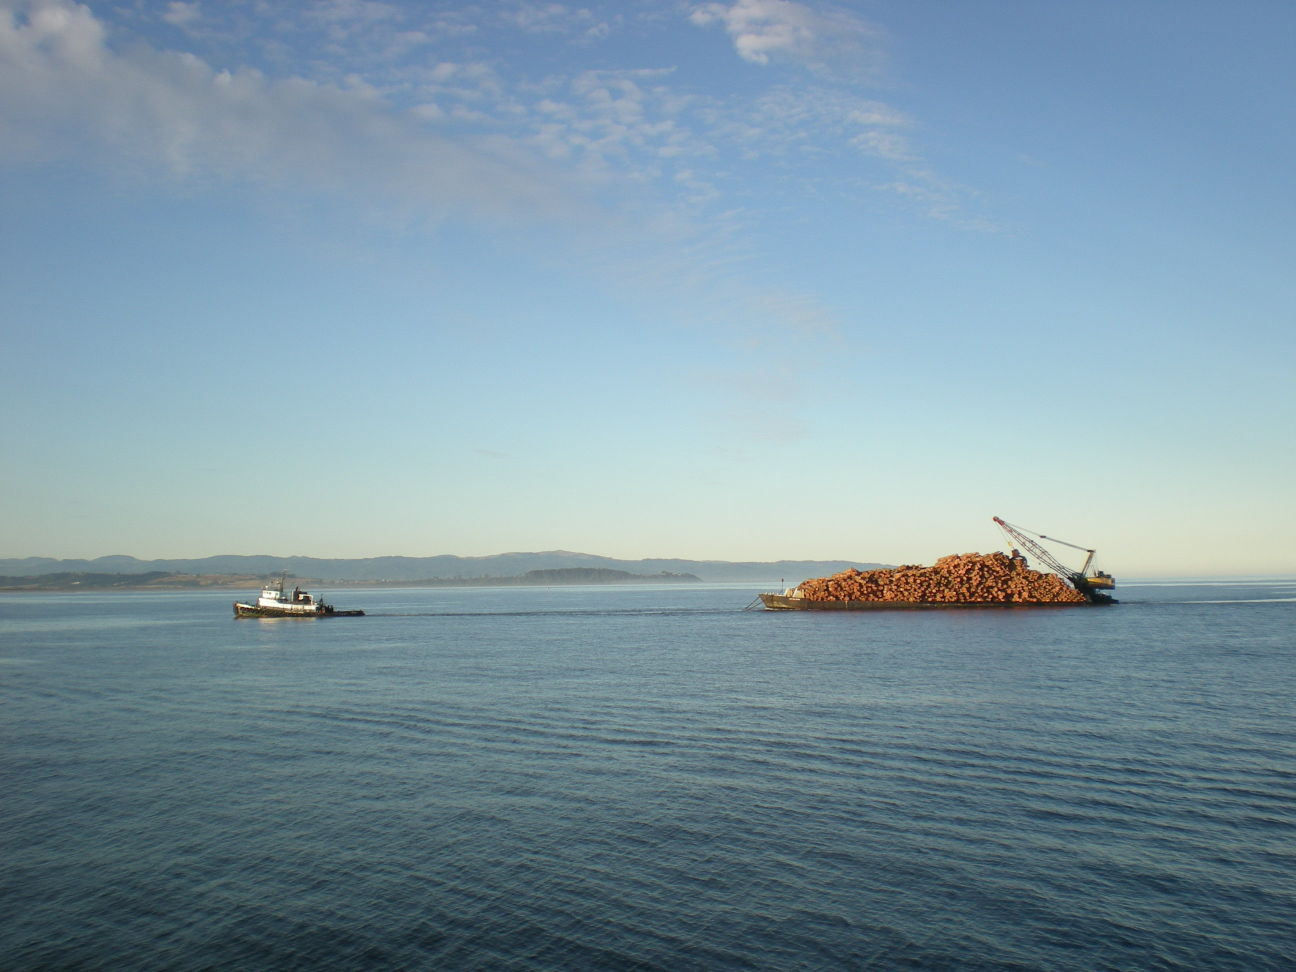 A tug towing a barge-load of logs somewhere in the Inside Passage